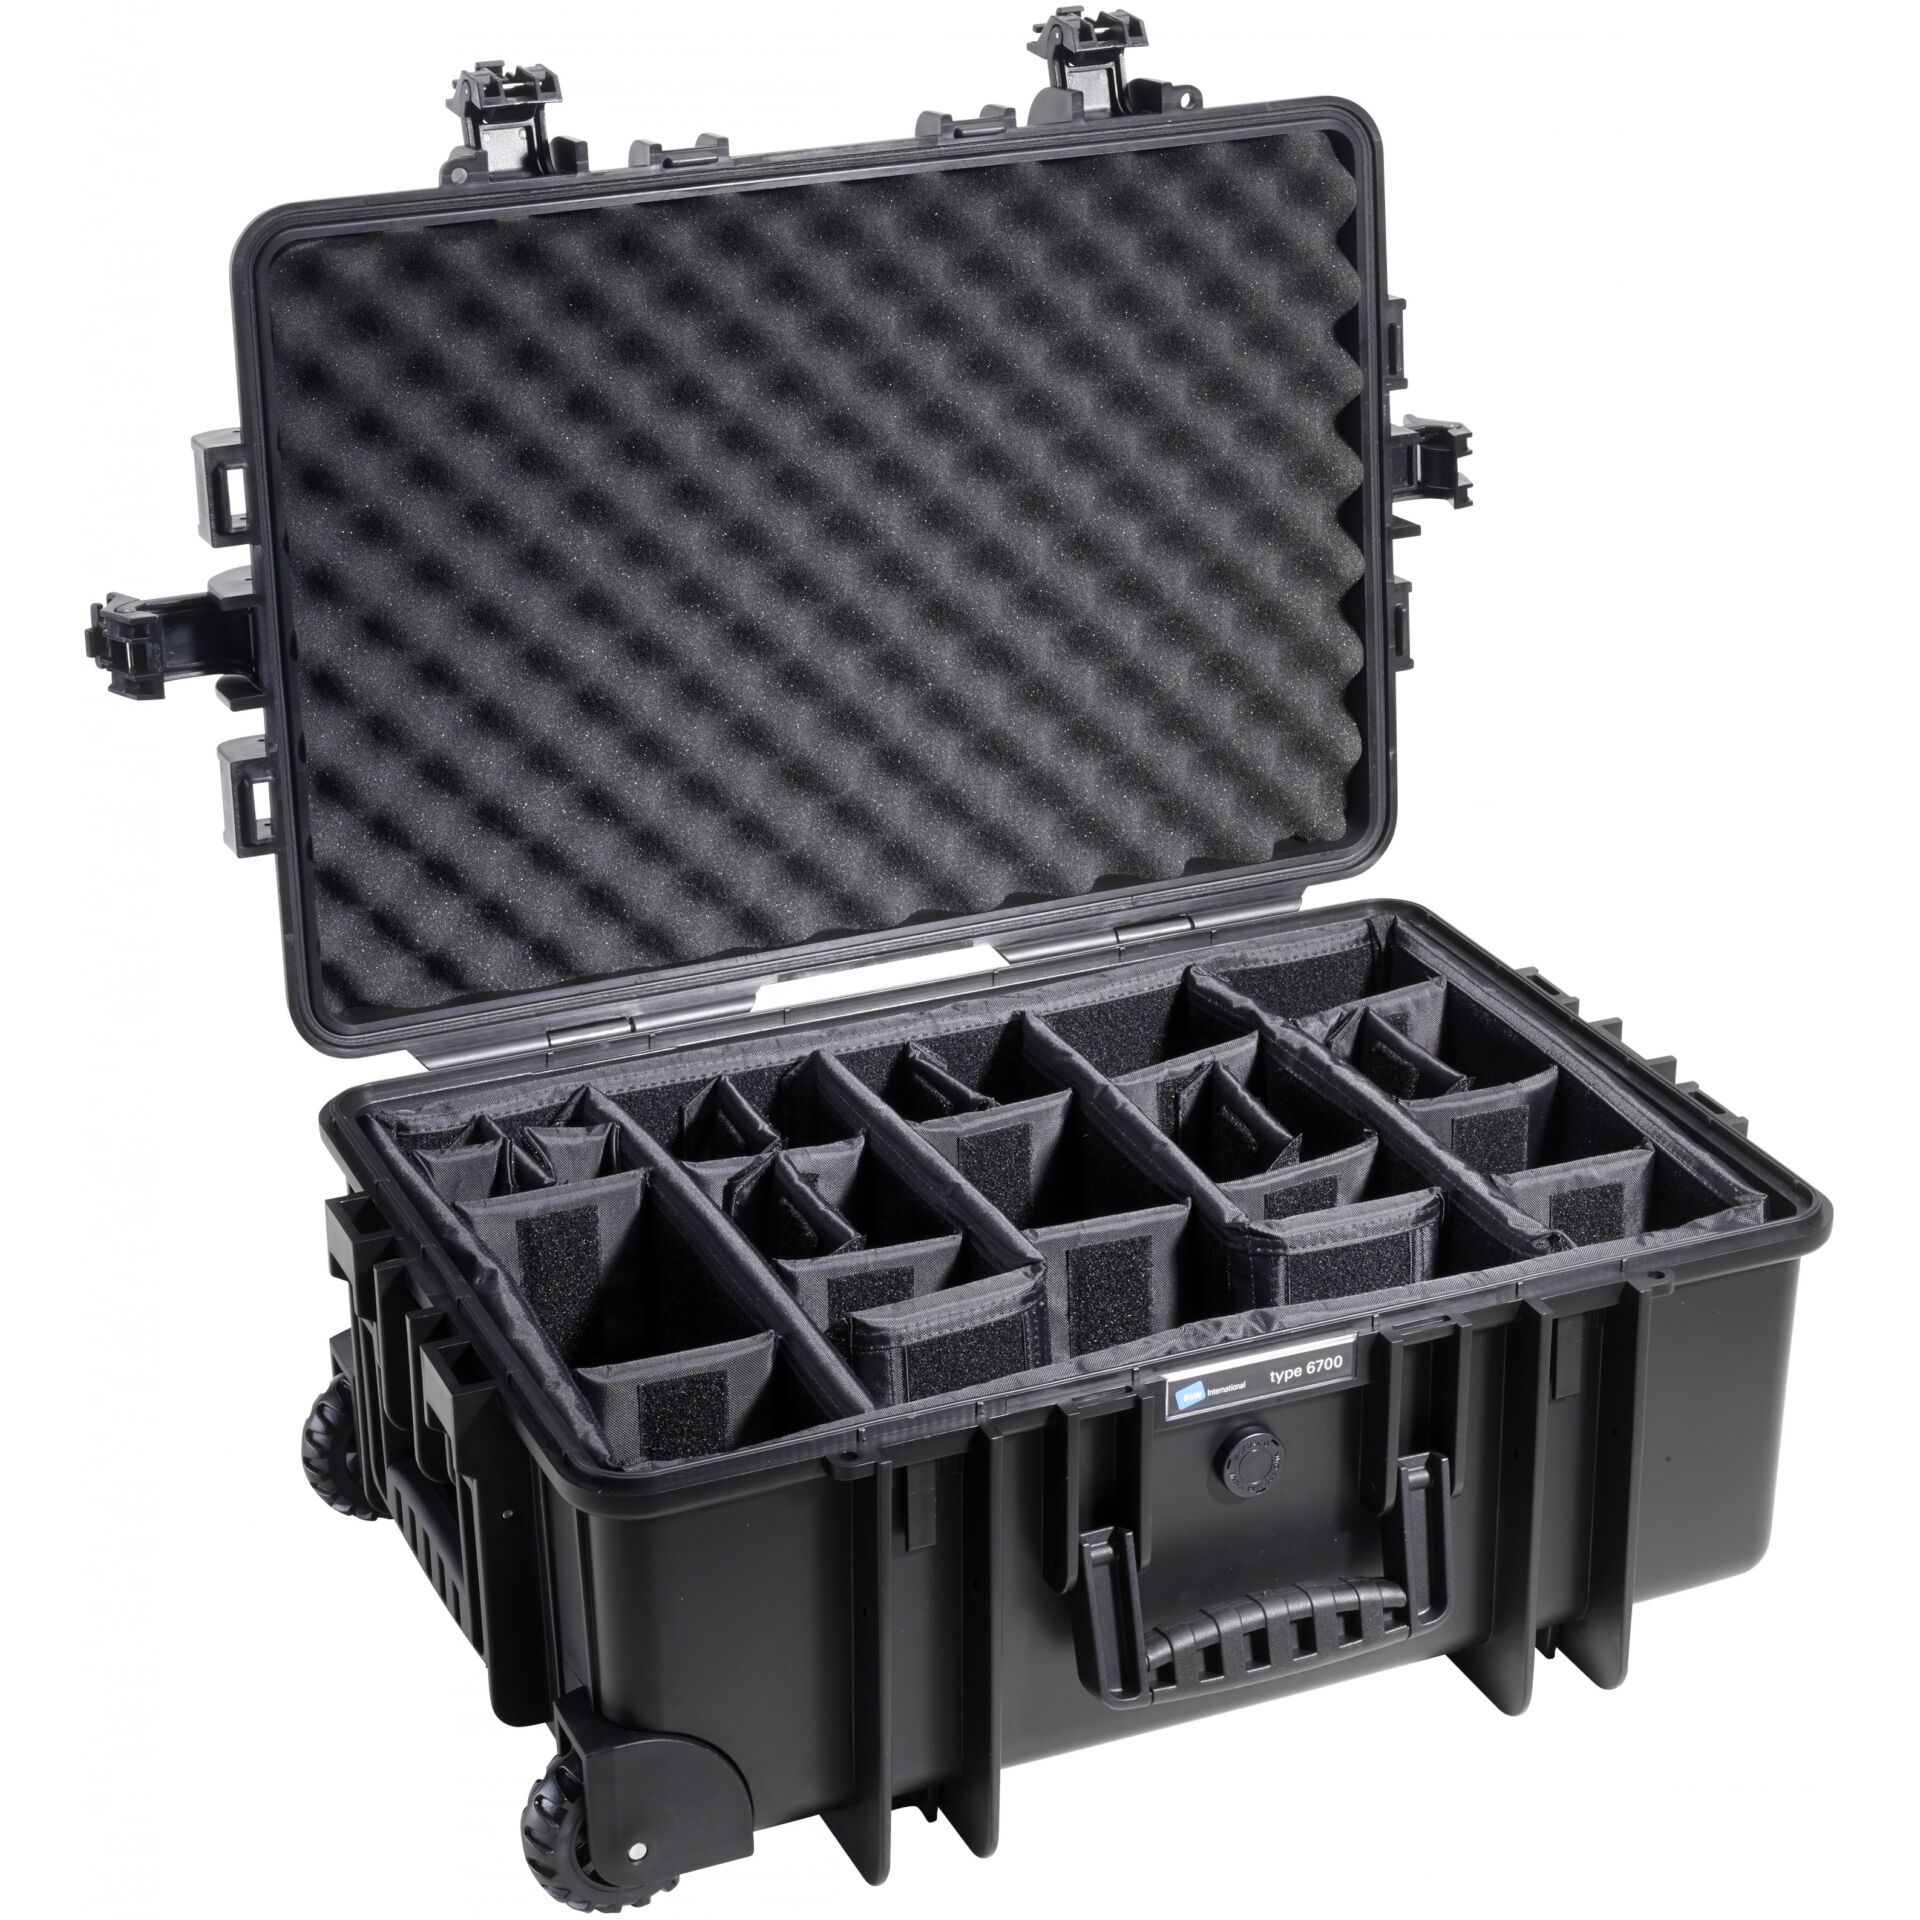 B&W Outdoor Case 6700 incl. divider system black